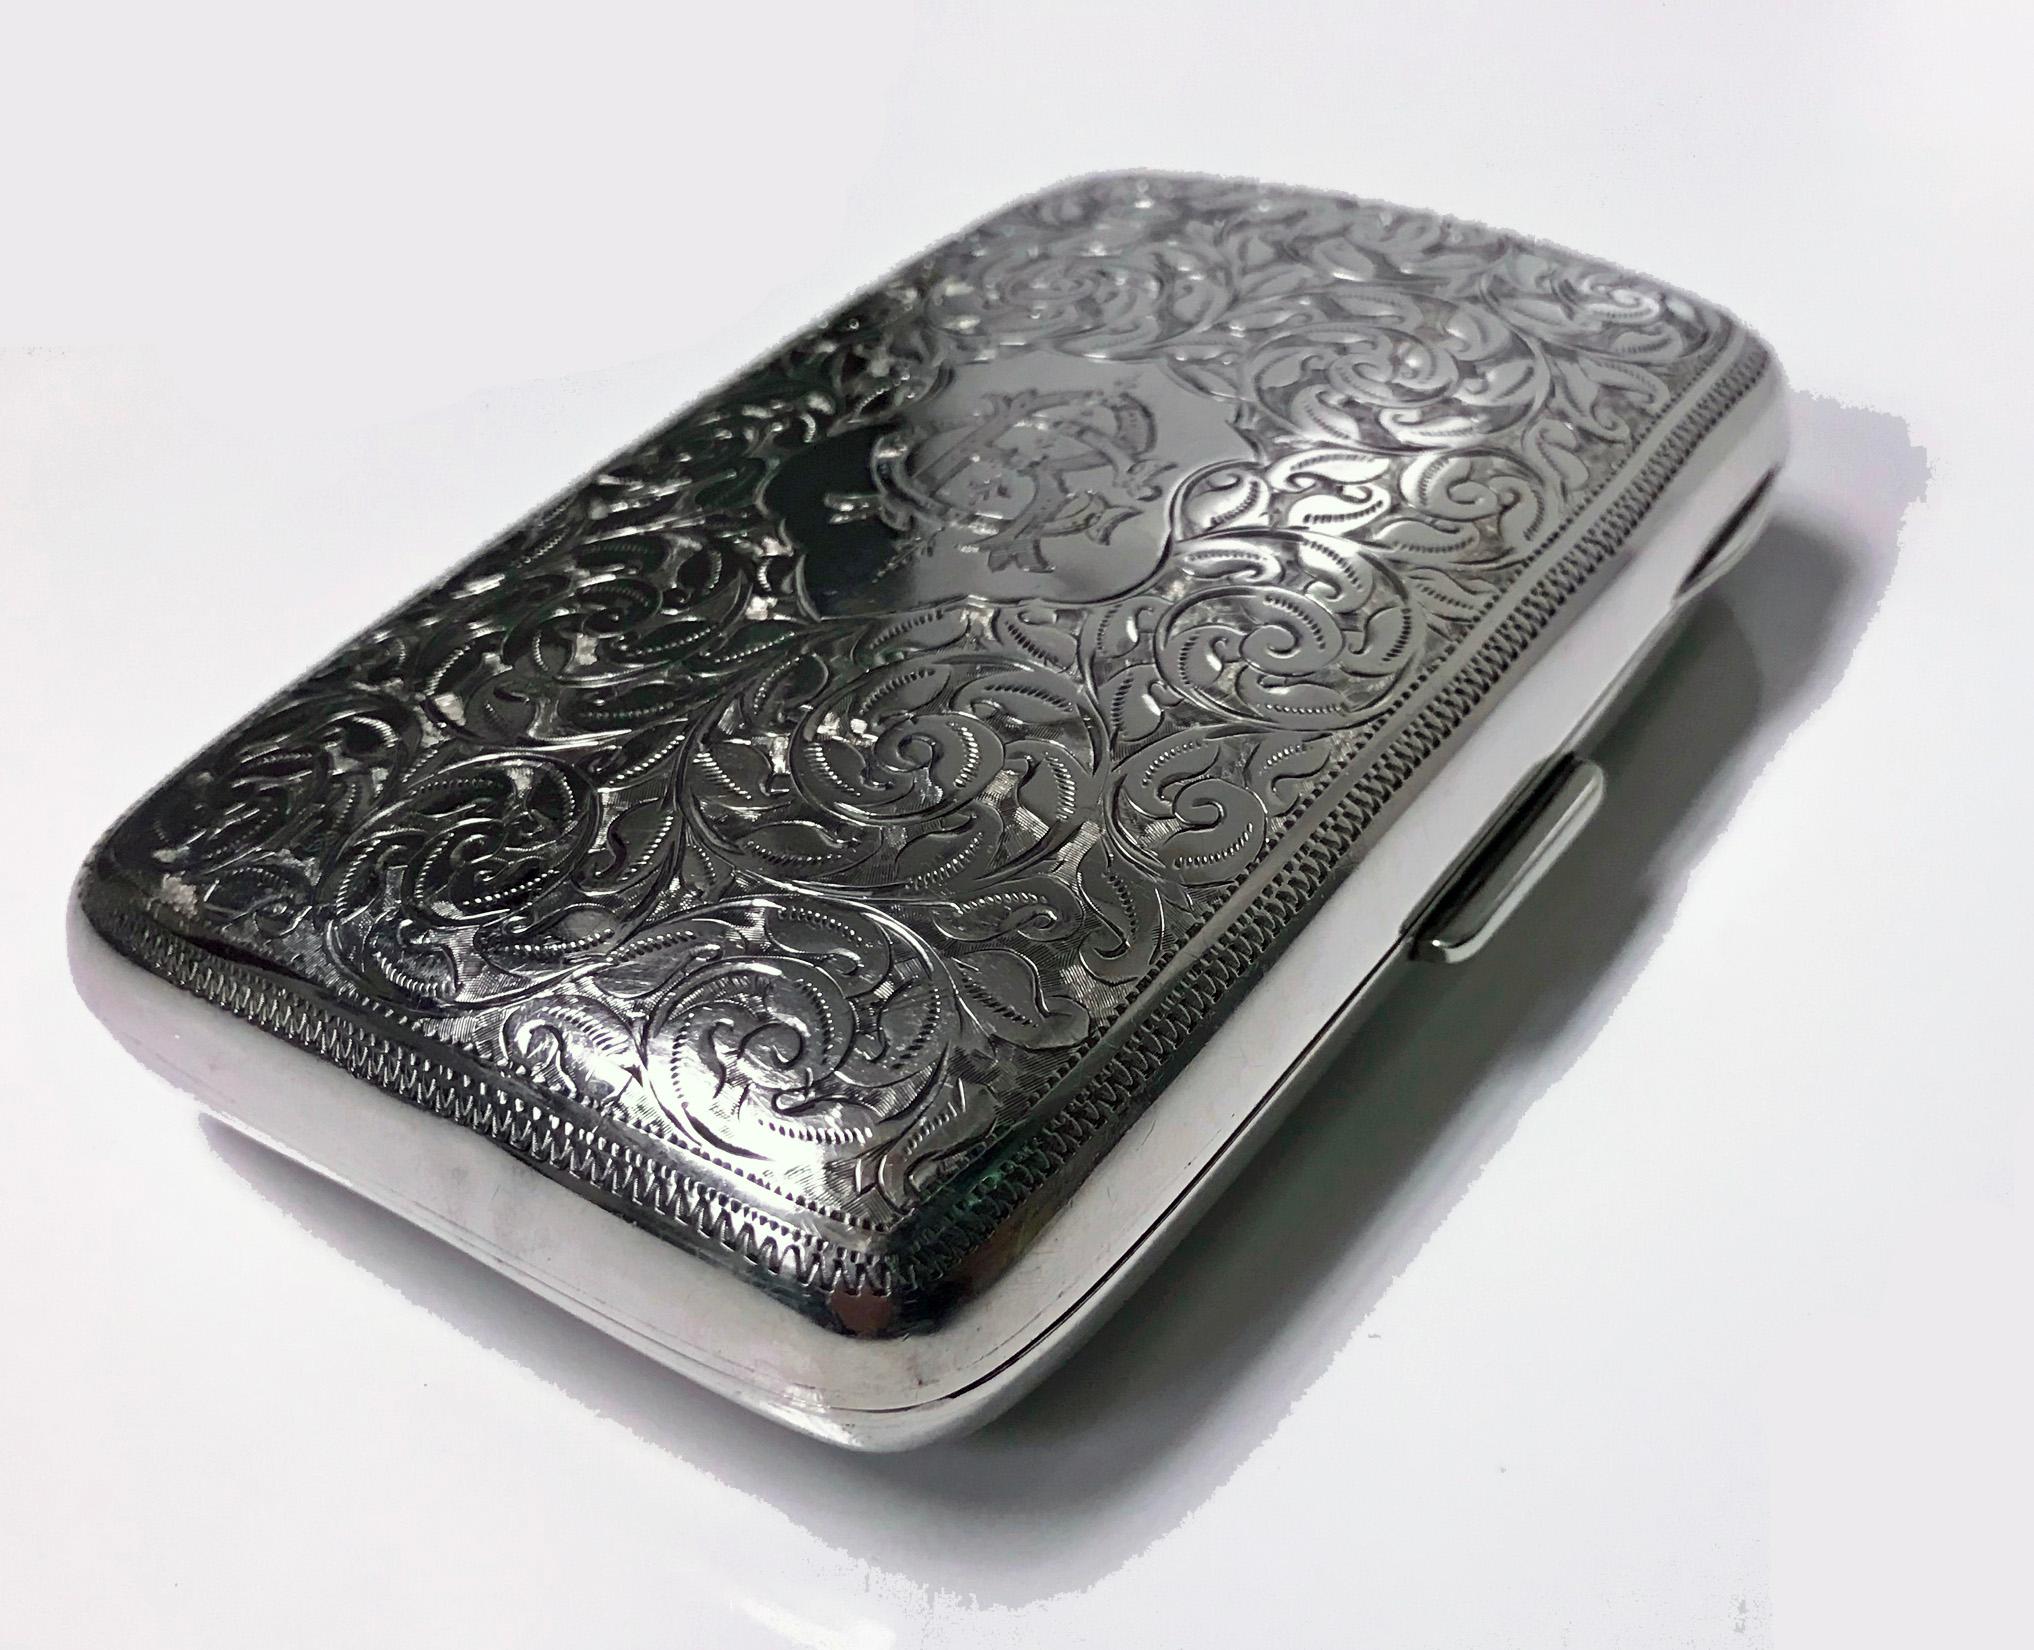 Antique sterling silver cigarette case, Birmingham 1898 JR. The case of slightly cushion rectangular form richly engraved with foliate decoration, intertwined RC or CR on one side, the interior gilded, original material band, has some wear to